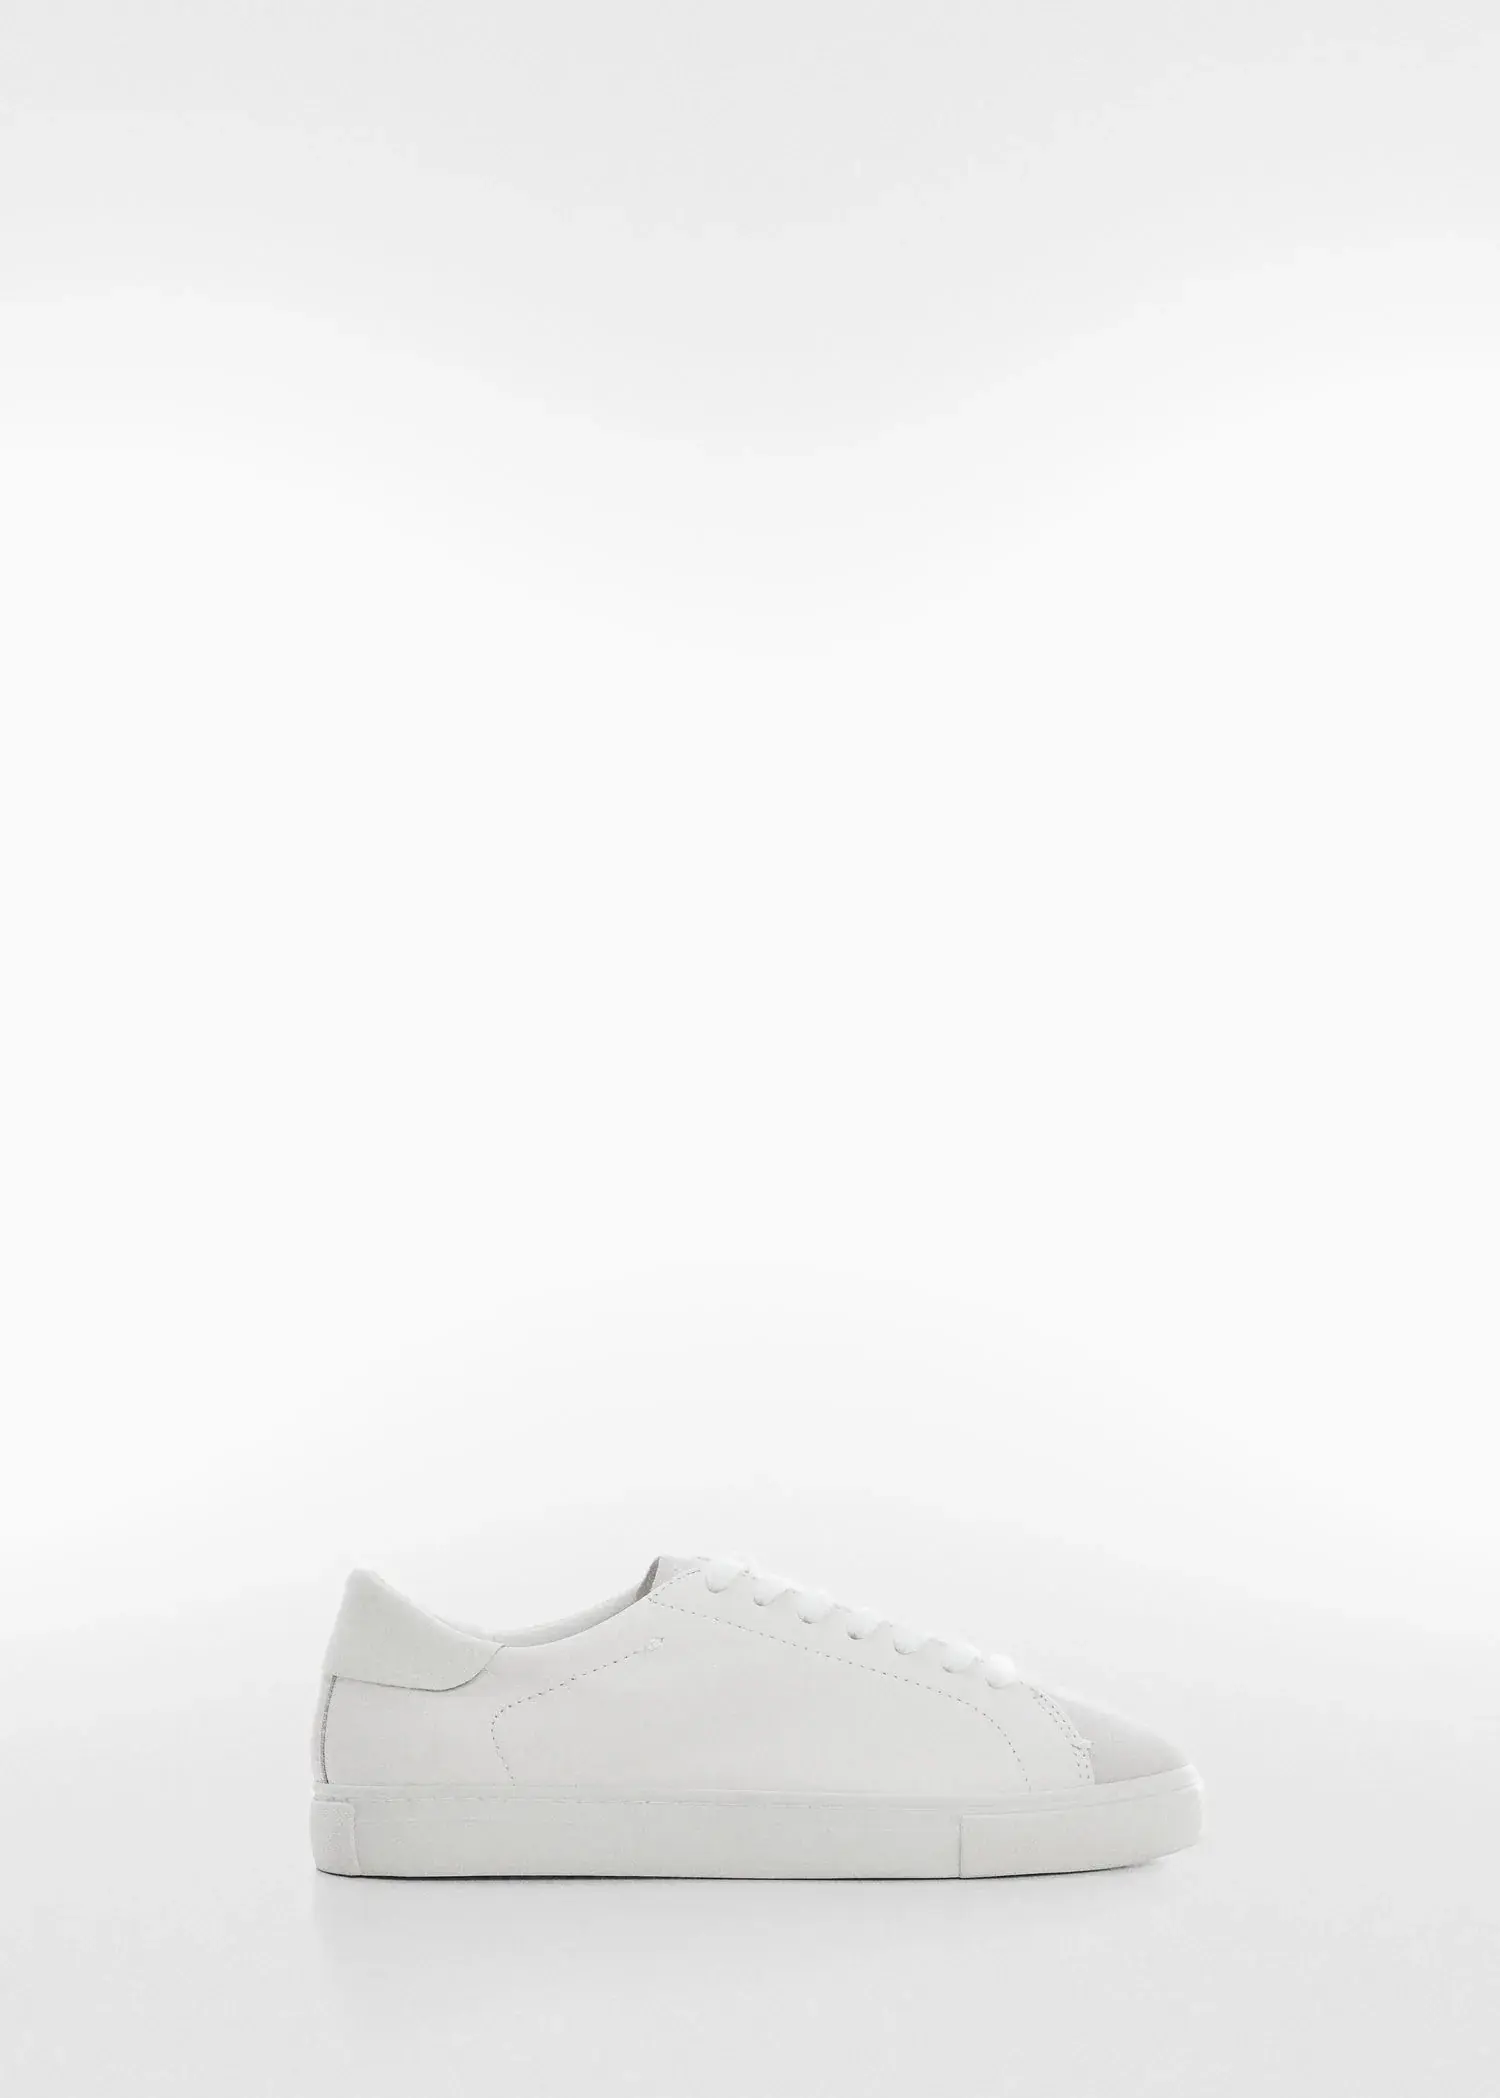 Mango Leather panel sneakers. a pair of white shoes on a white background. 